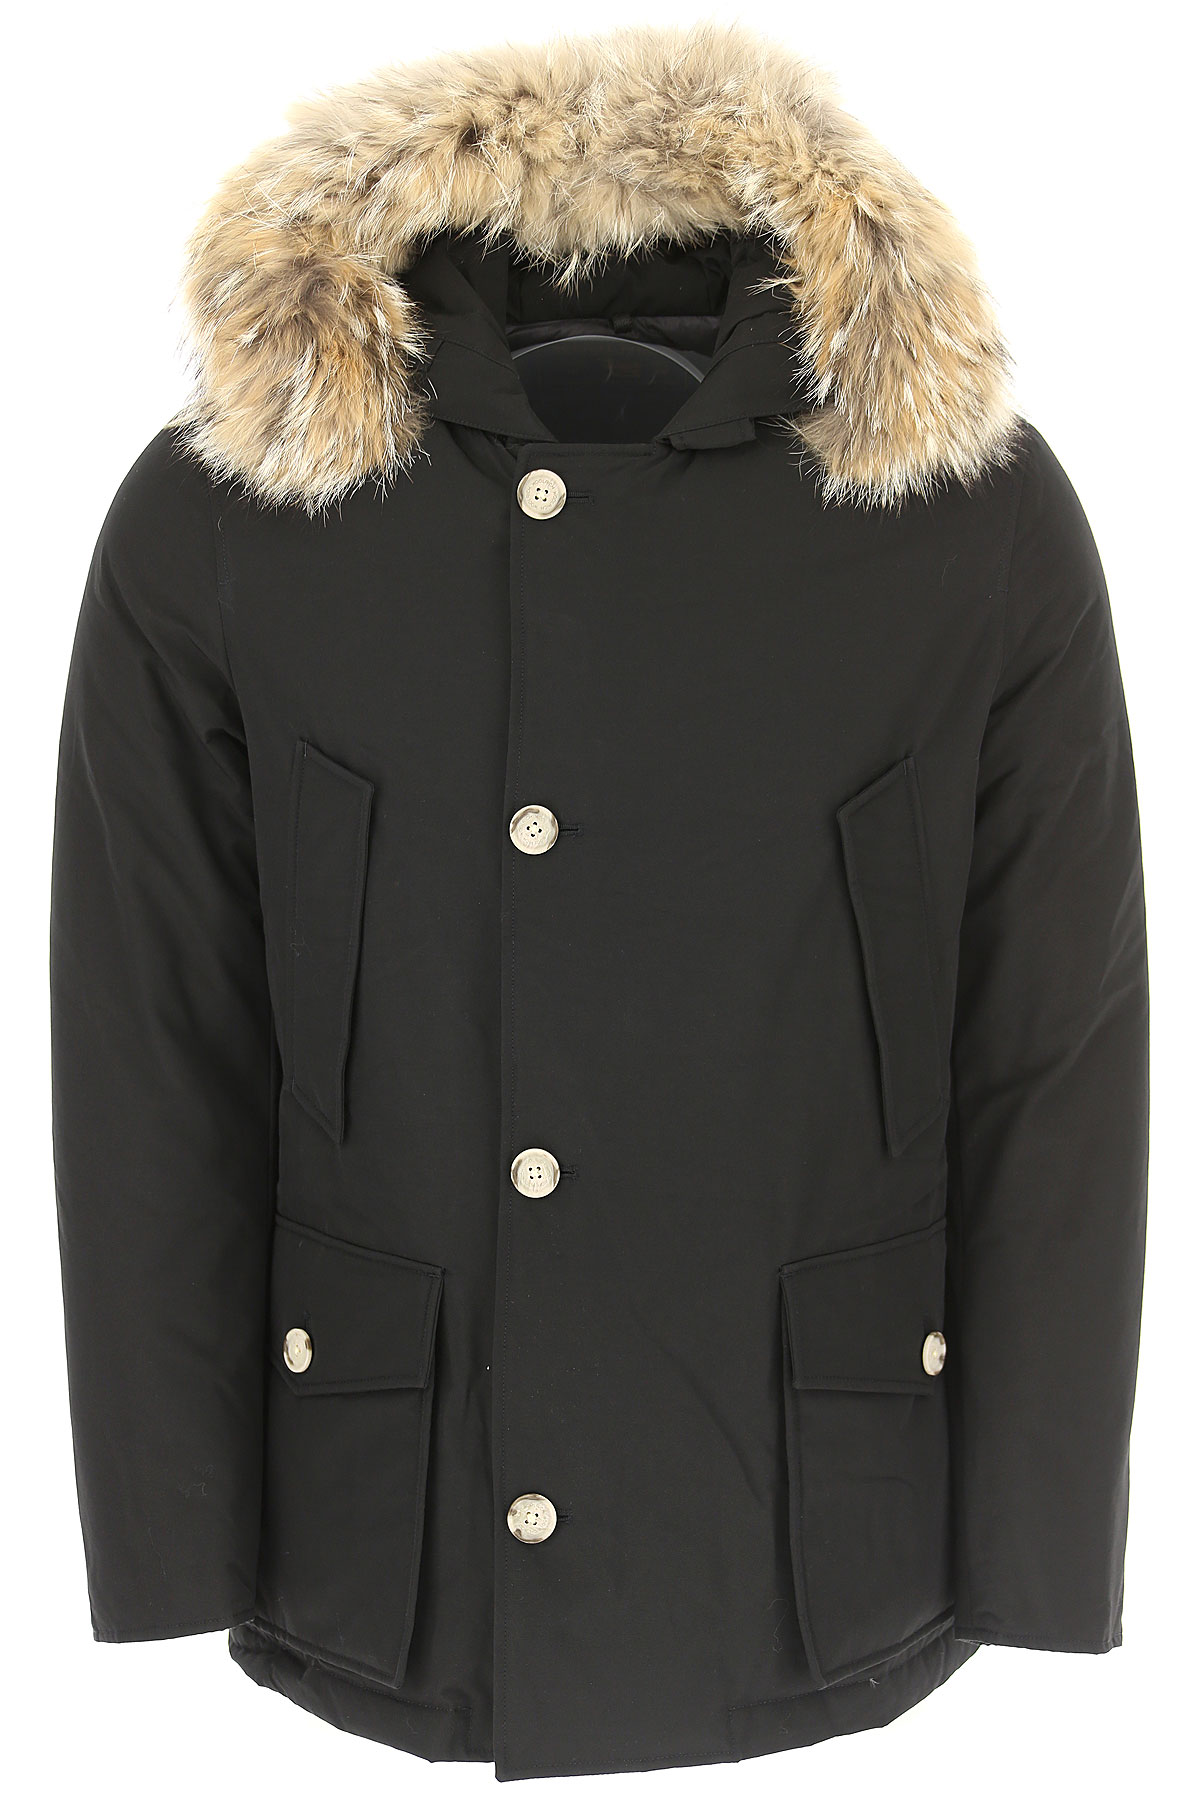 Mens Clothing Woolrich, Style code: w0cps2739-cn03-blk